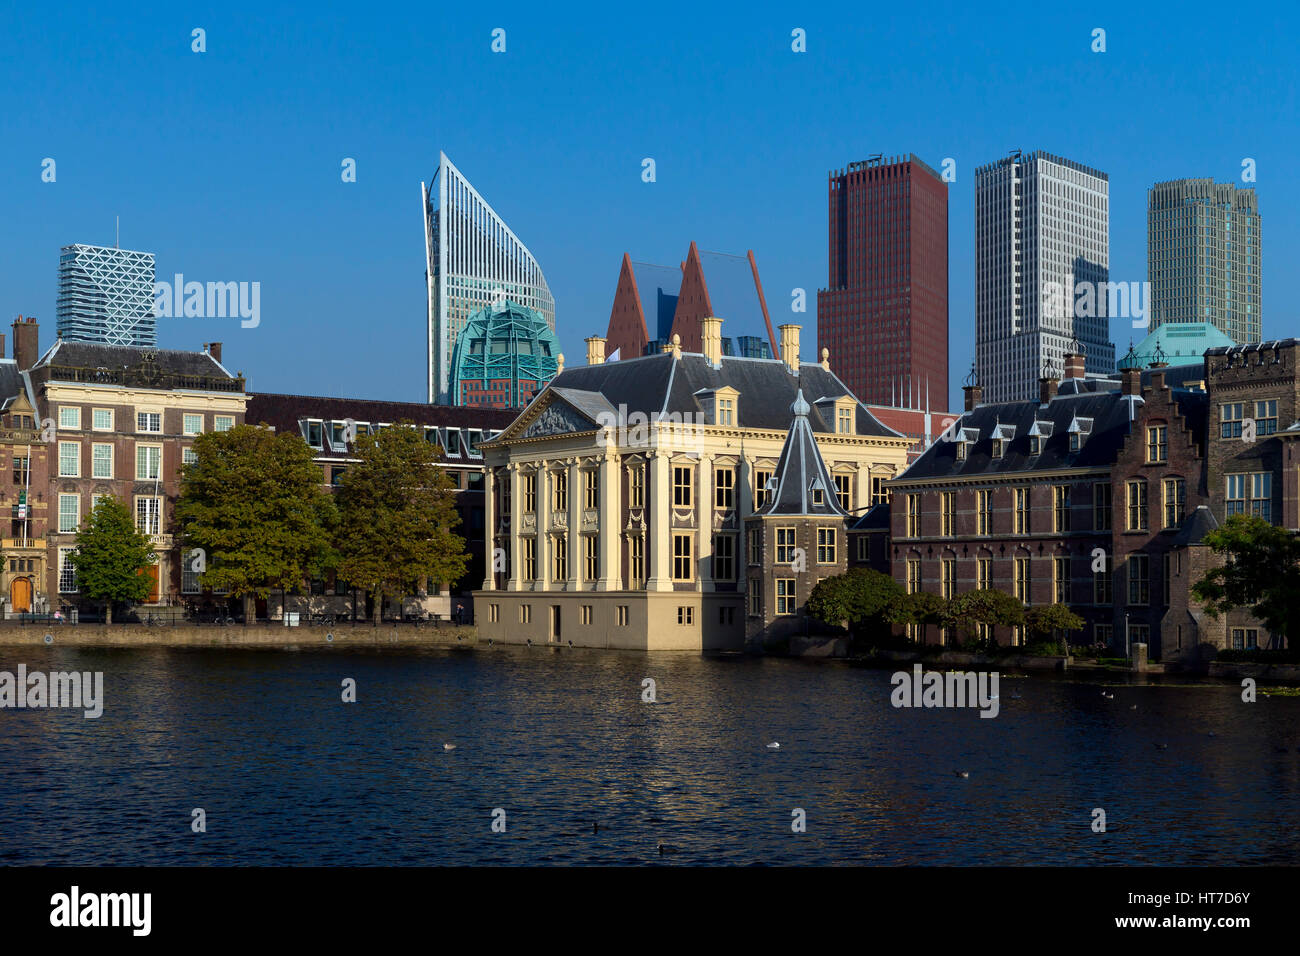 Royal picture gallery Mauritshuis and the Binnenhof,  The Hague, Netherlands, Europe Stock Photo